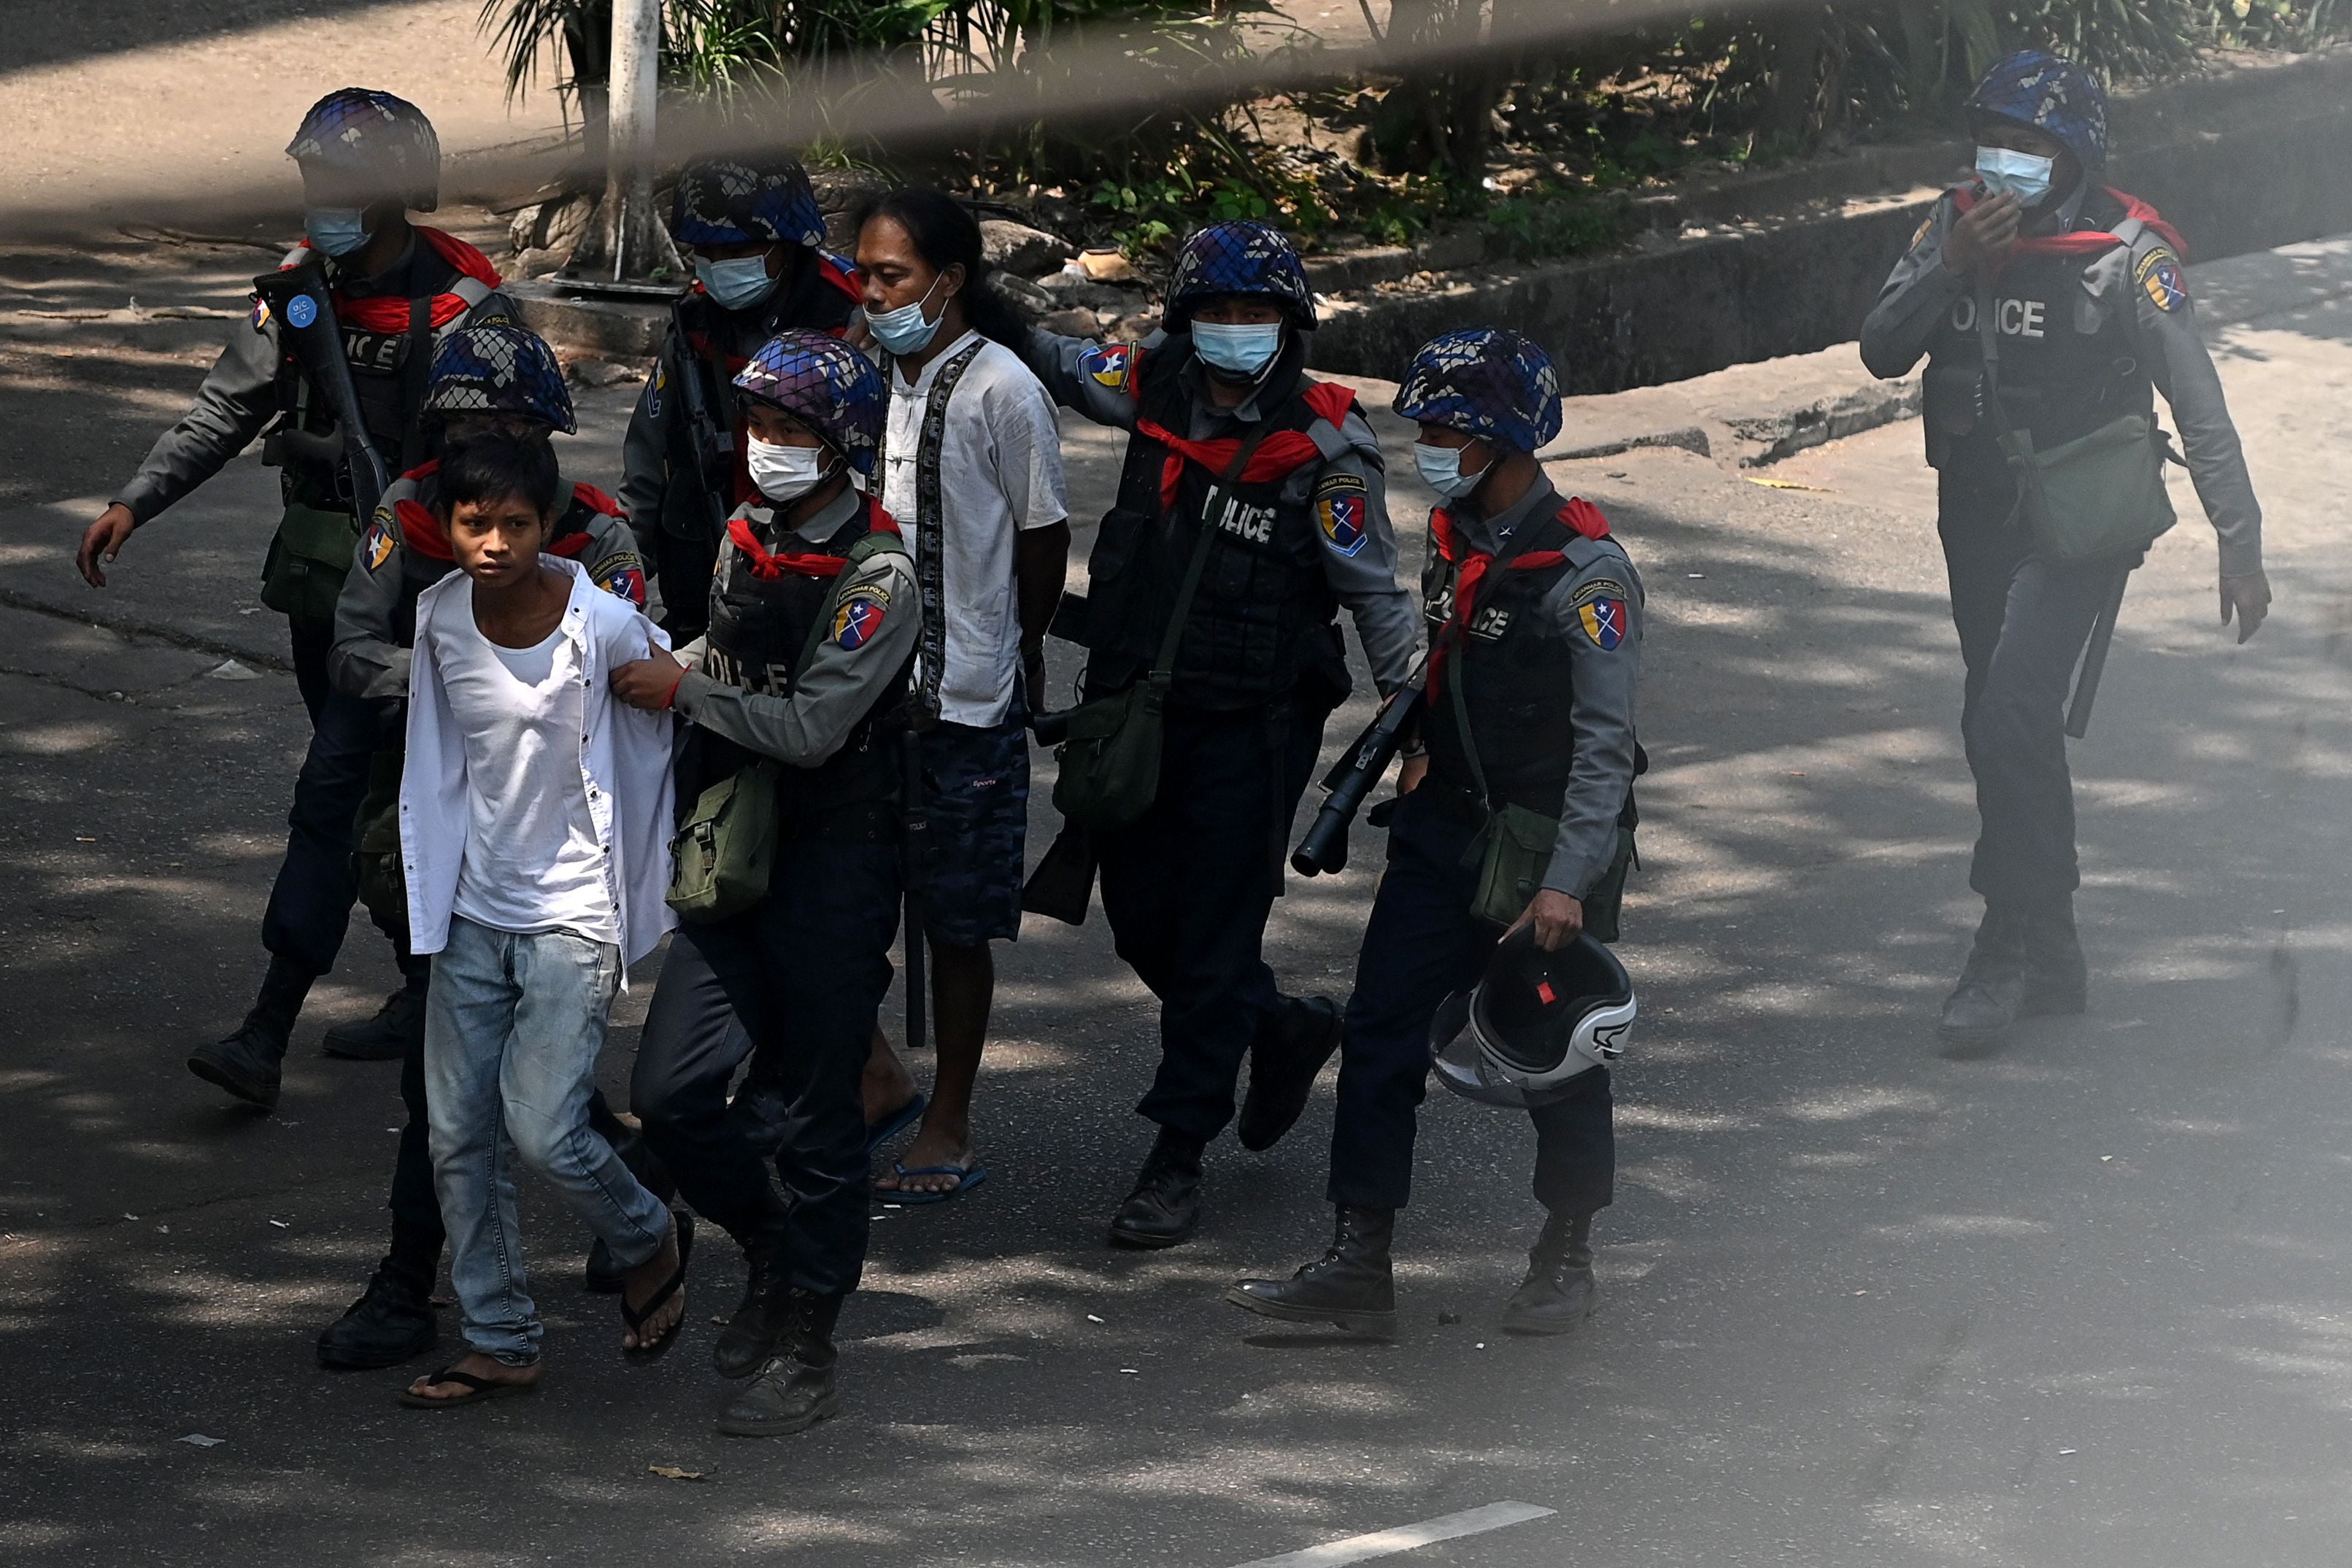 Police arrest people in Yangon on 27 February as protesters demonstrate against country’s military coup